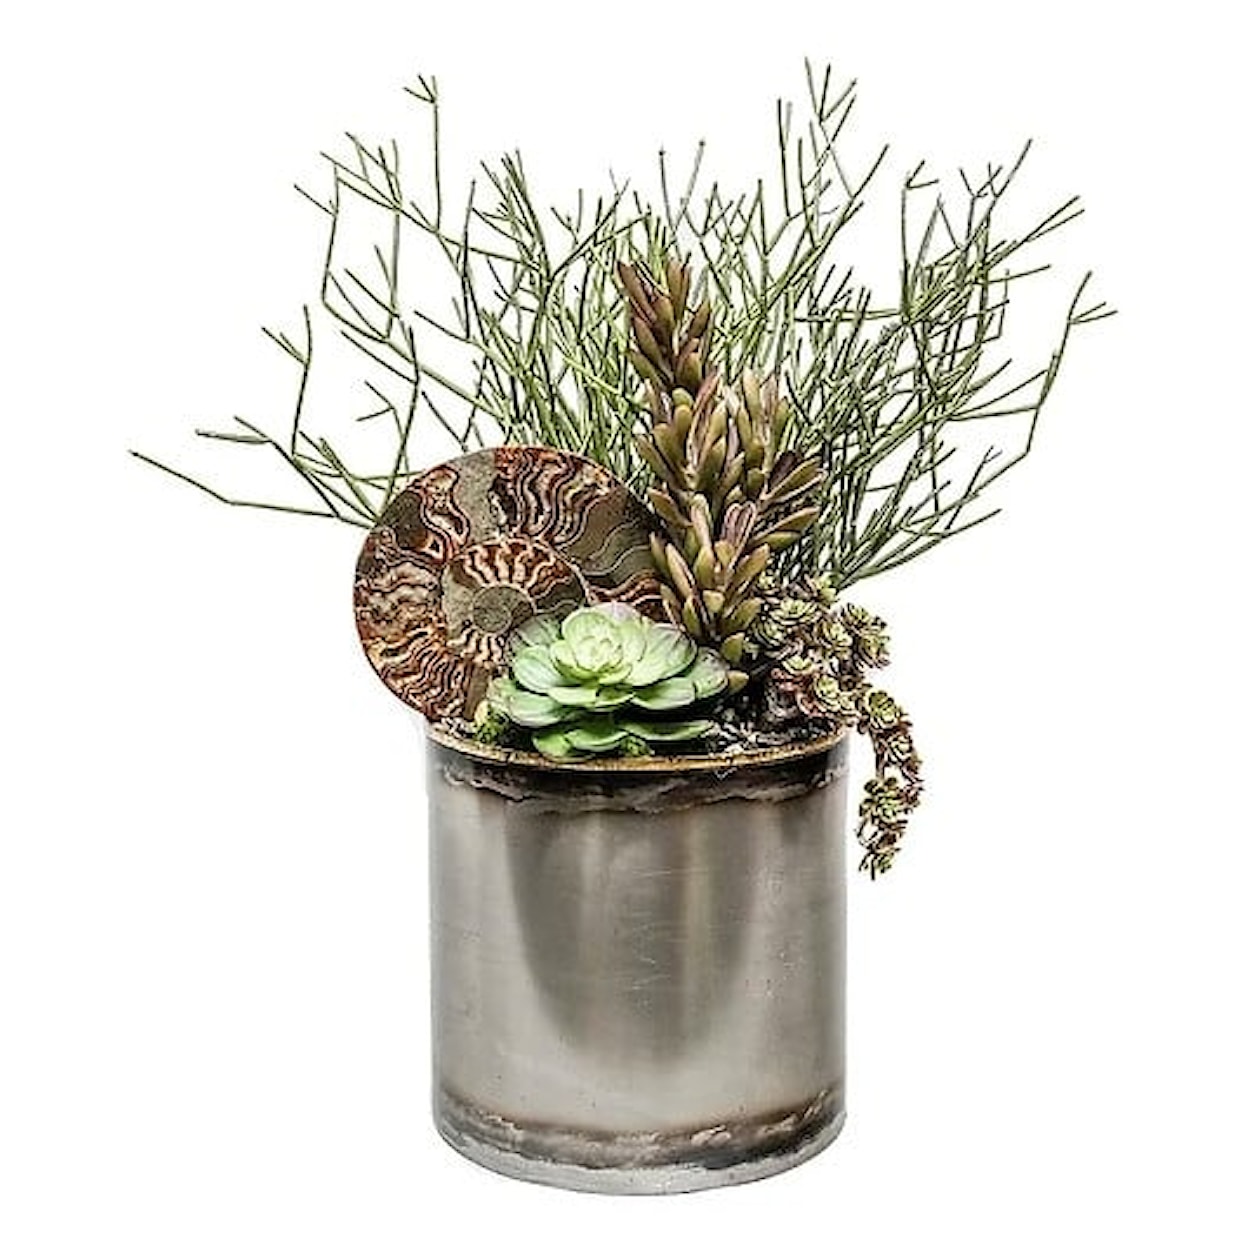 The Ivy Guild Botanicals 8" Tin Pot w/ Ammonite Fossil/Succulents 